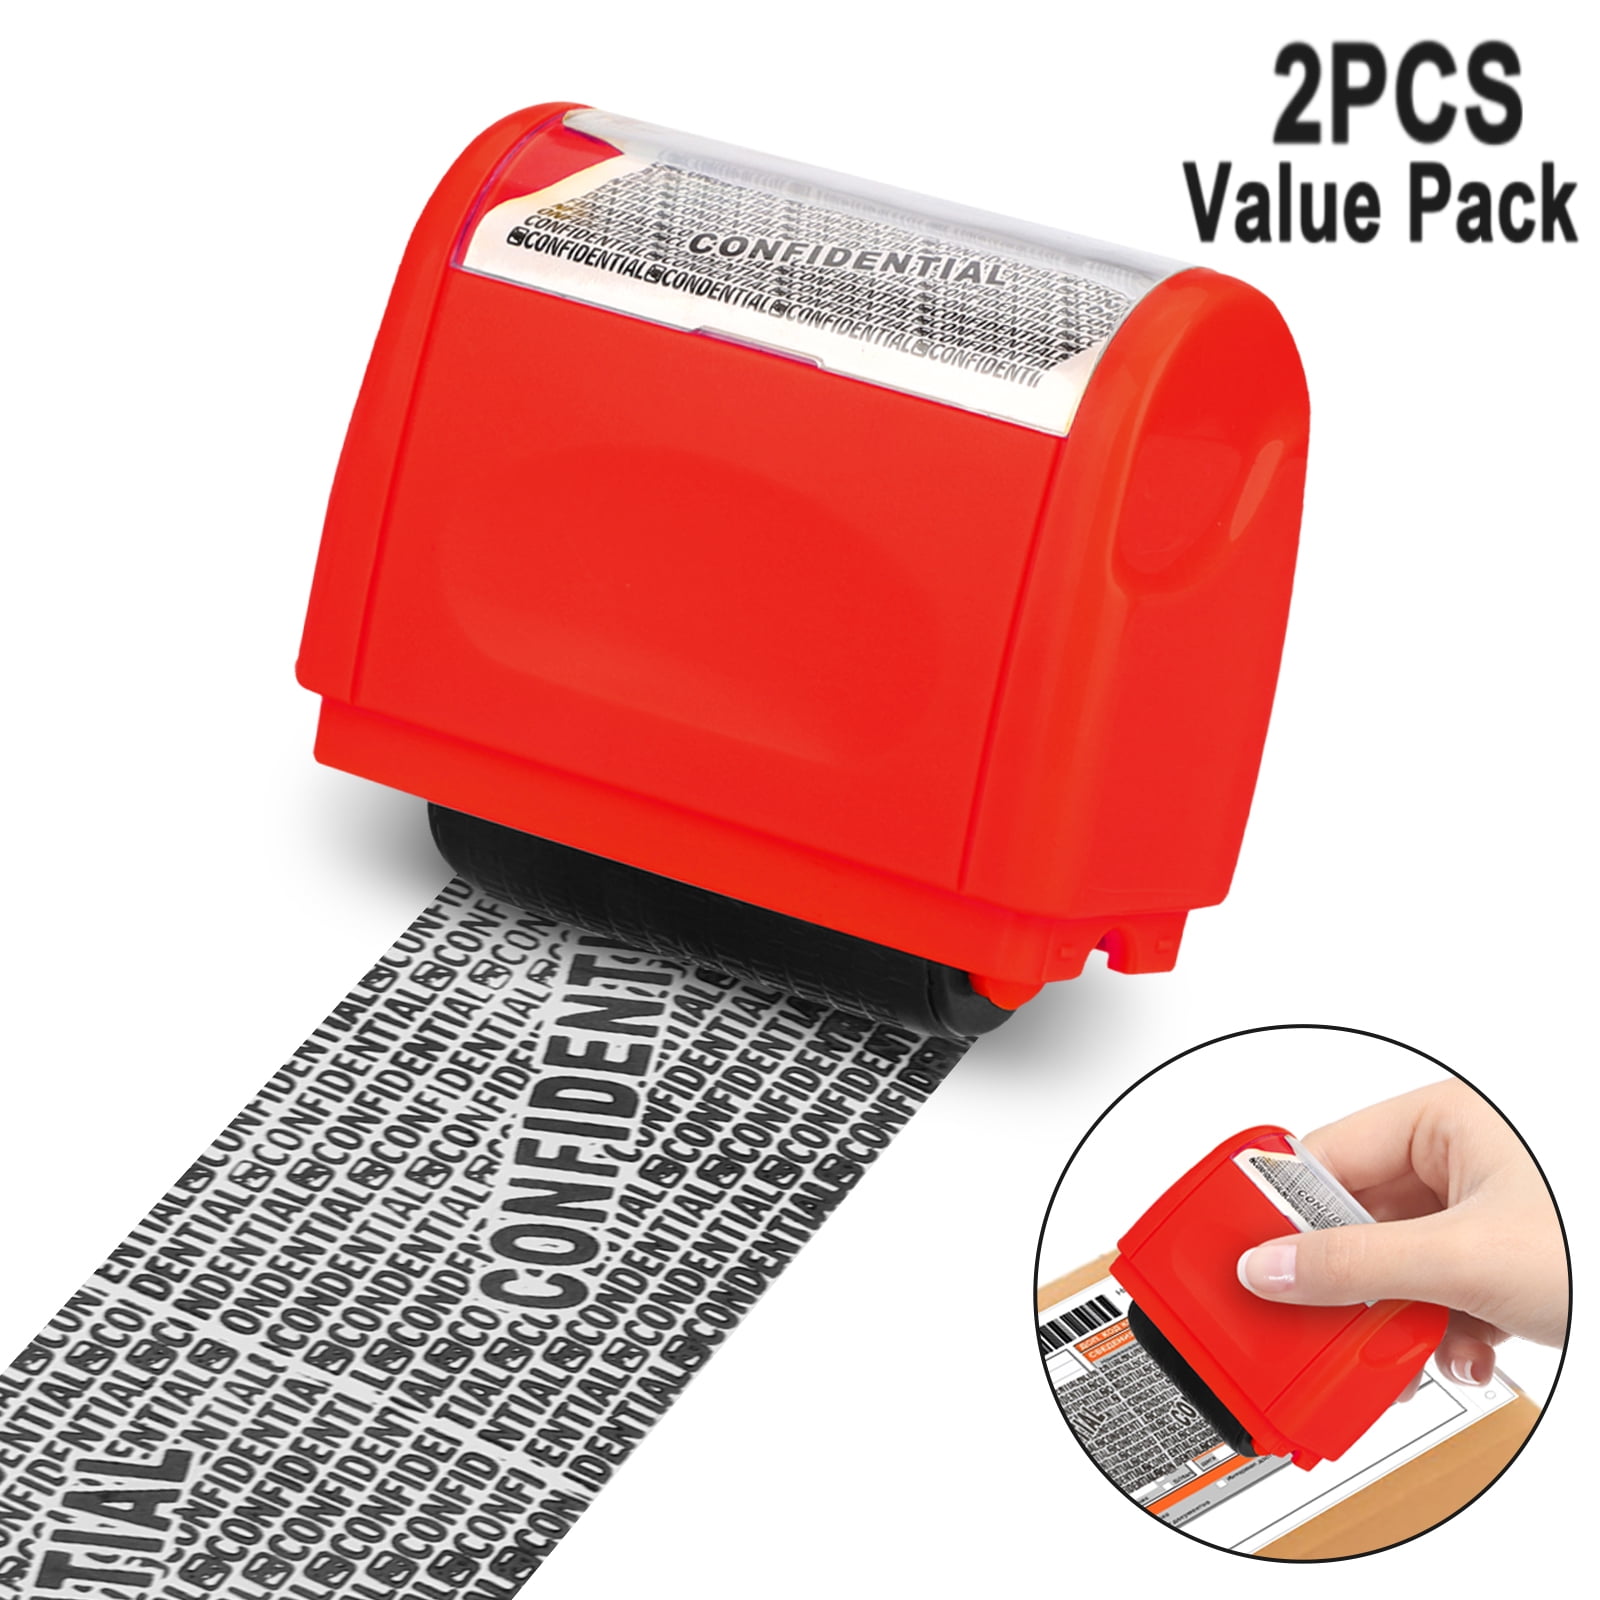 Anti Theft and Privacy Safety Identity Theft Protection Roller Stamp Wide Kit for Secure Confidential ID Blackout Security 